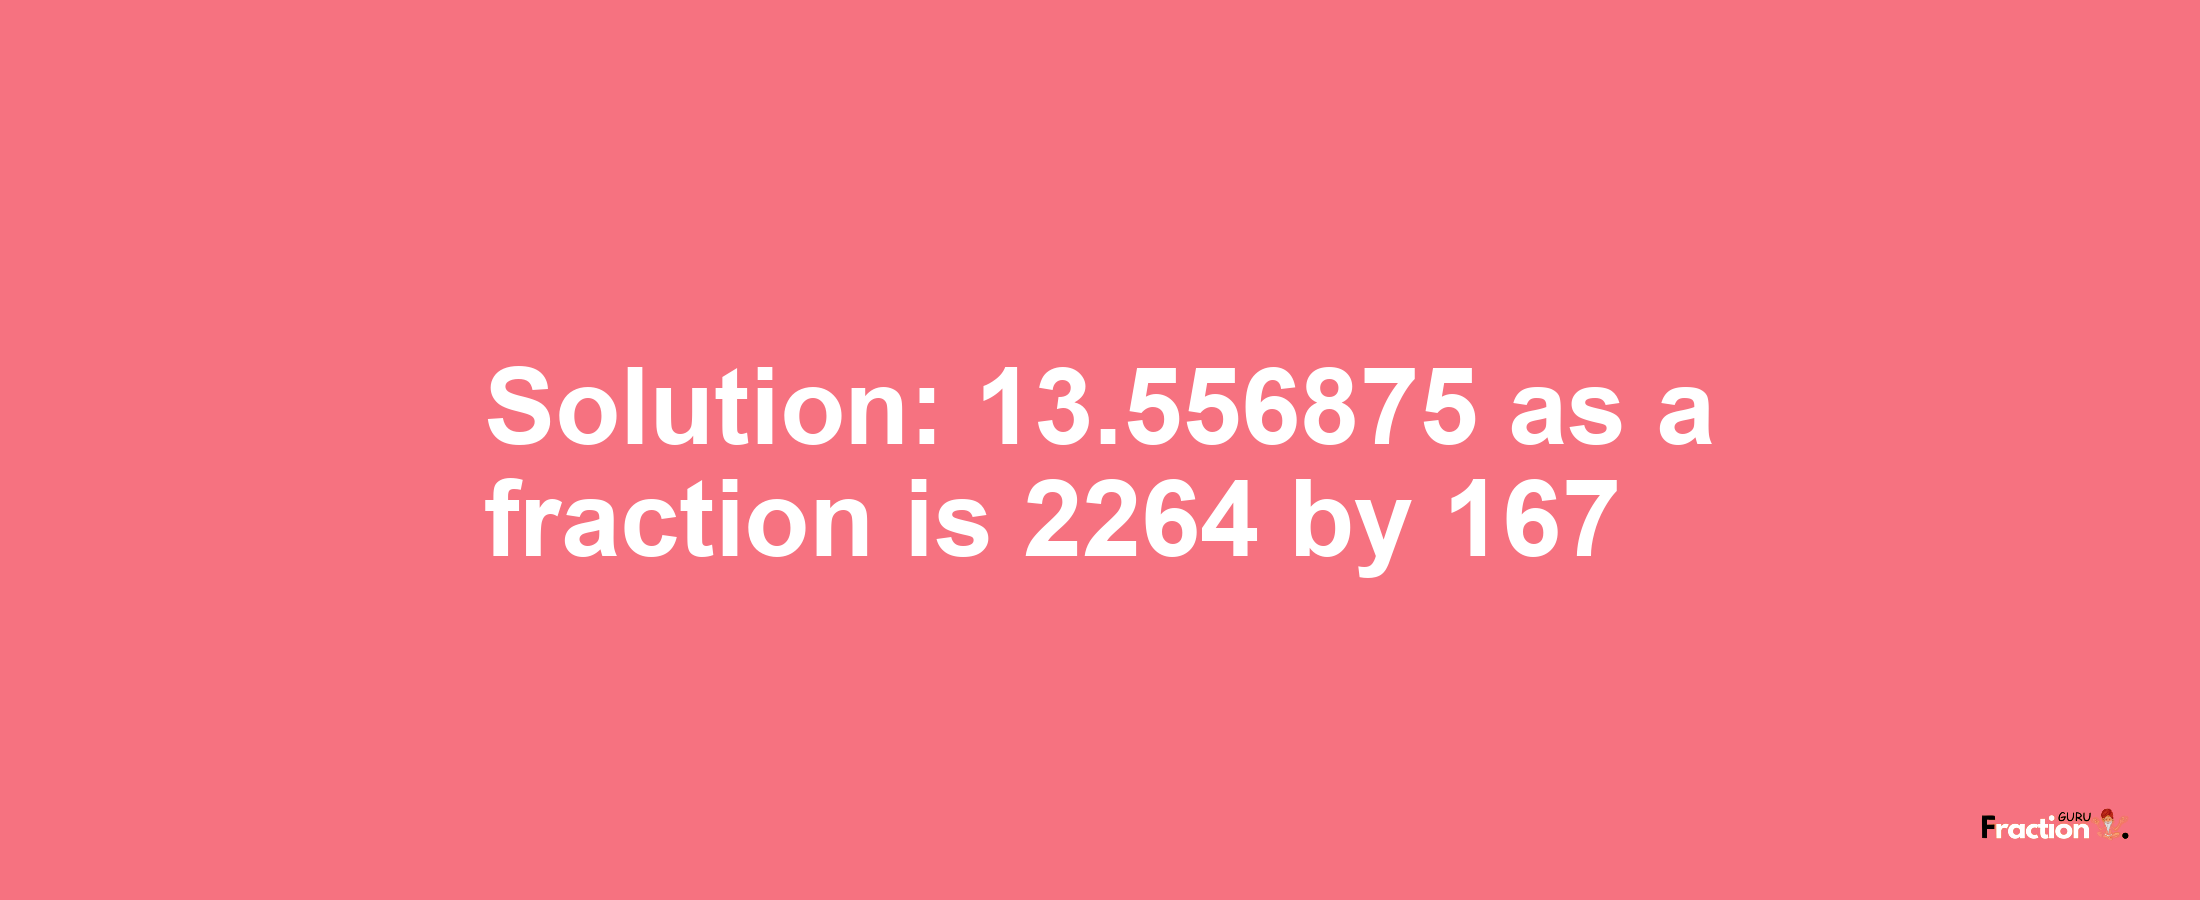 Solution:13.556875 as a fraction is 2264/167